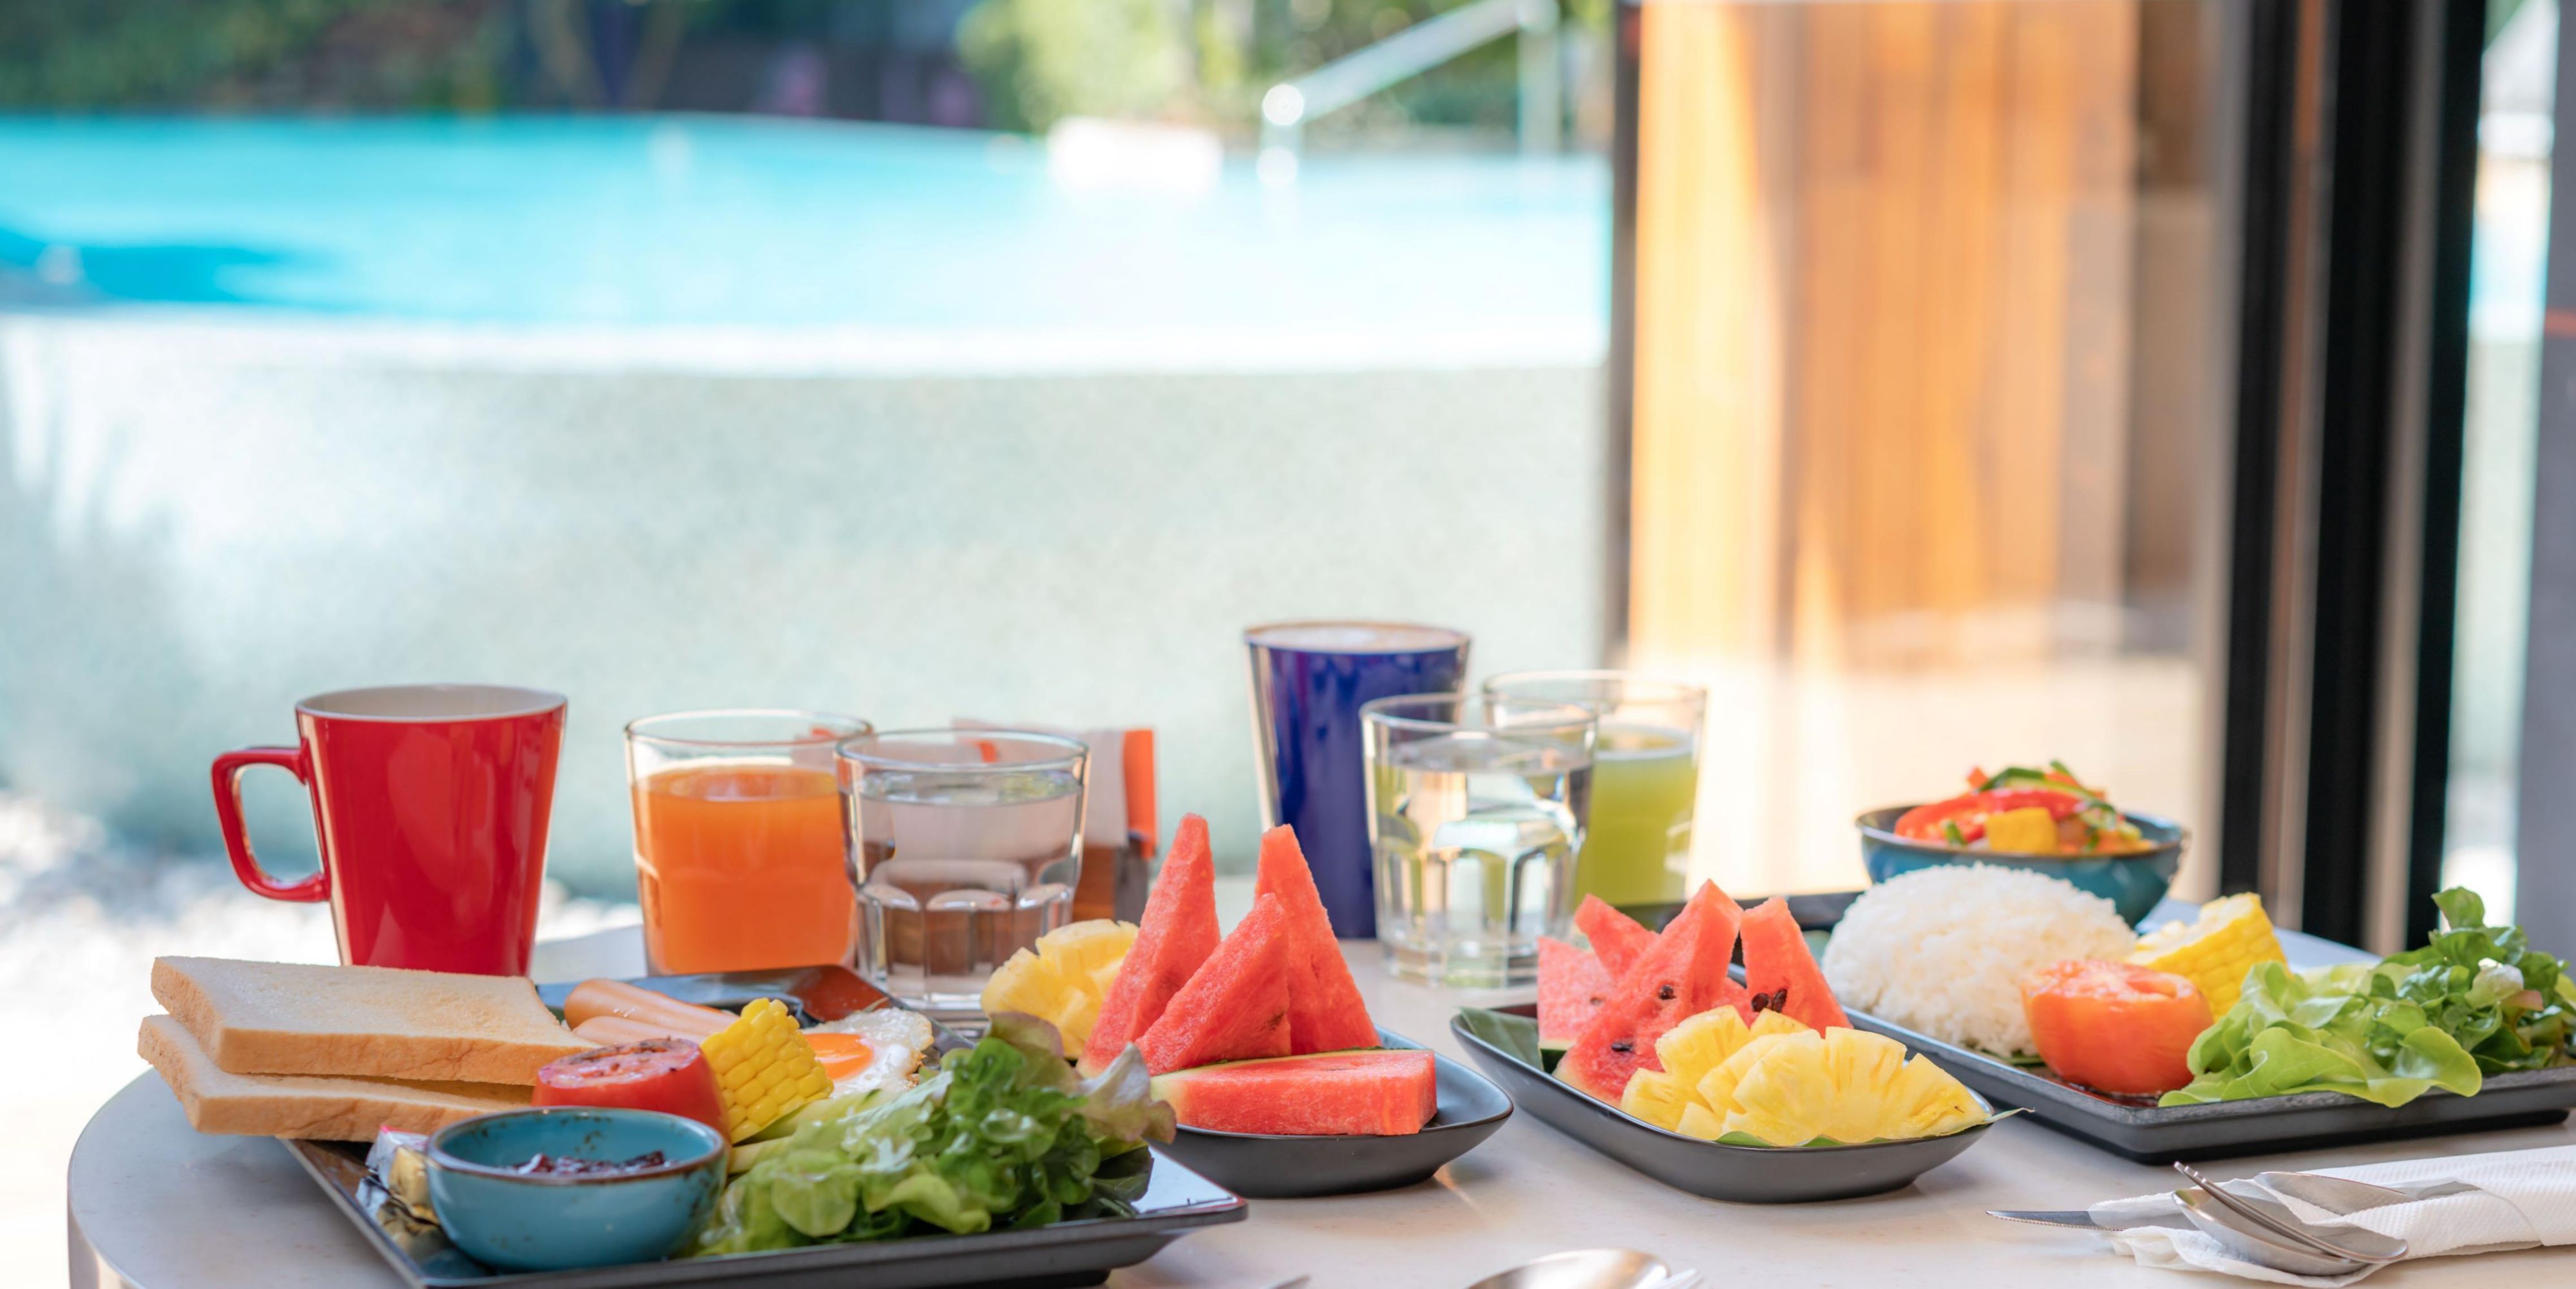 Start your day with an express breakfast! Every easy and sensible stay with us includes a delicious breakfast buffet. Enjoy a variety of meals and beverages to help you re-energize. If you need something quickly, you can use our grab & go service.